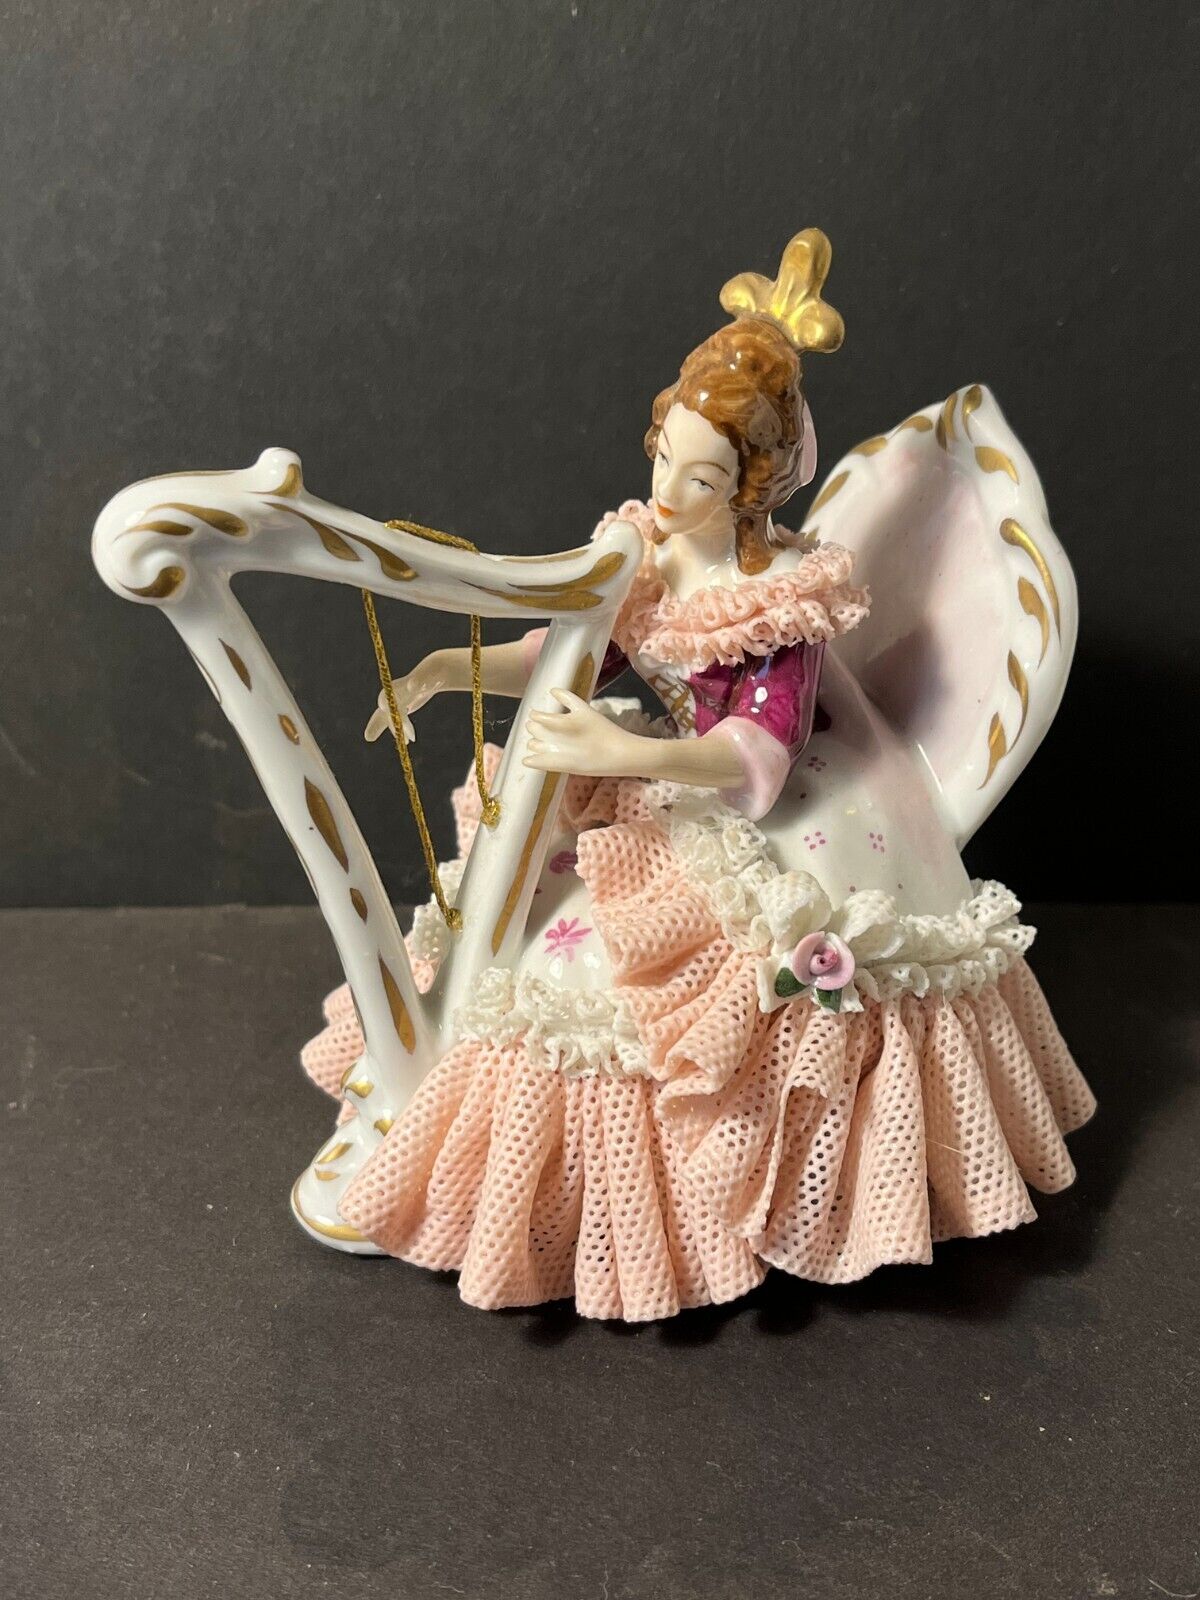 Vintage German Dresden Lace Figurine Lady with Harp. 4” Pink Porcelain Lace